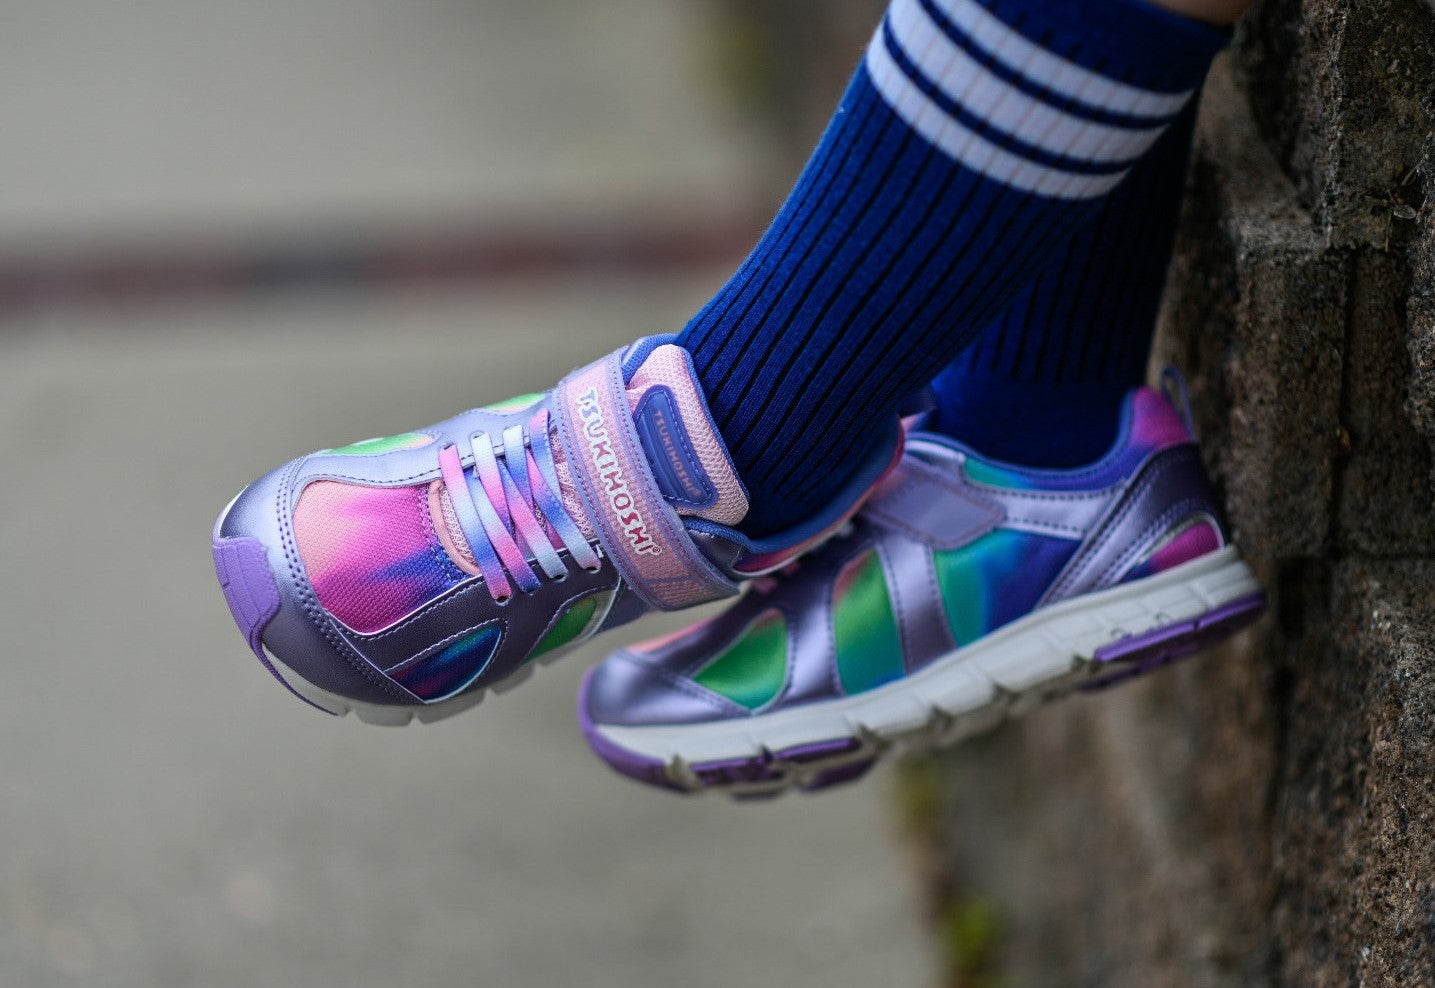 A close-up of a little kid wearing the Tsukihoshi Rainbow sneakers with knee high socks